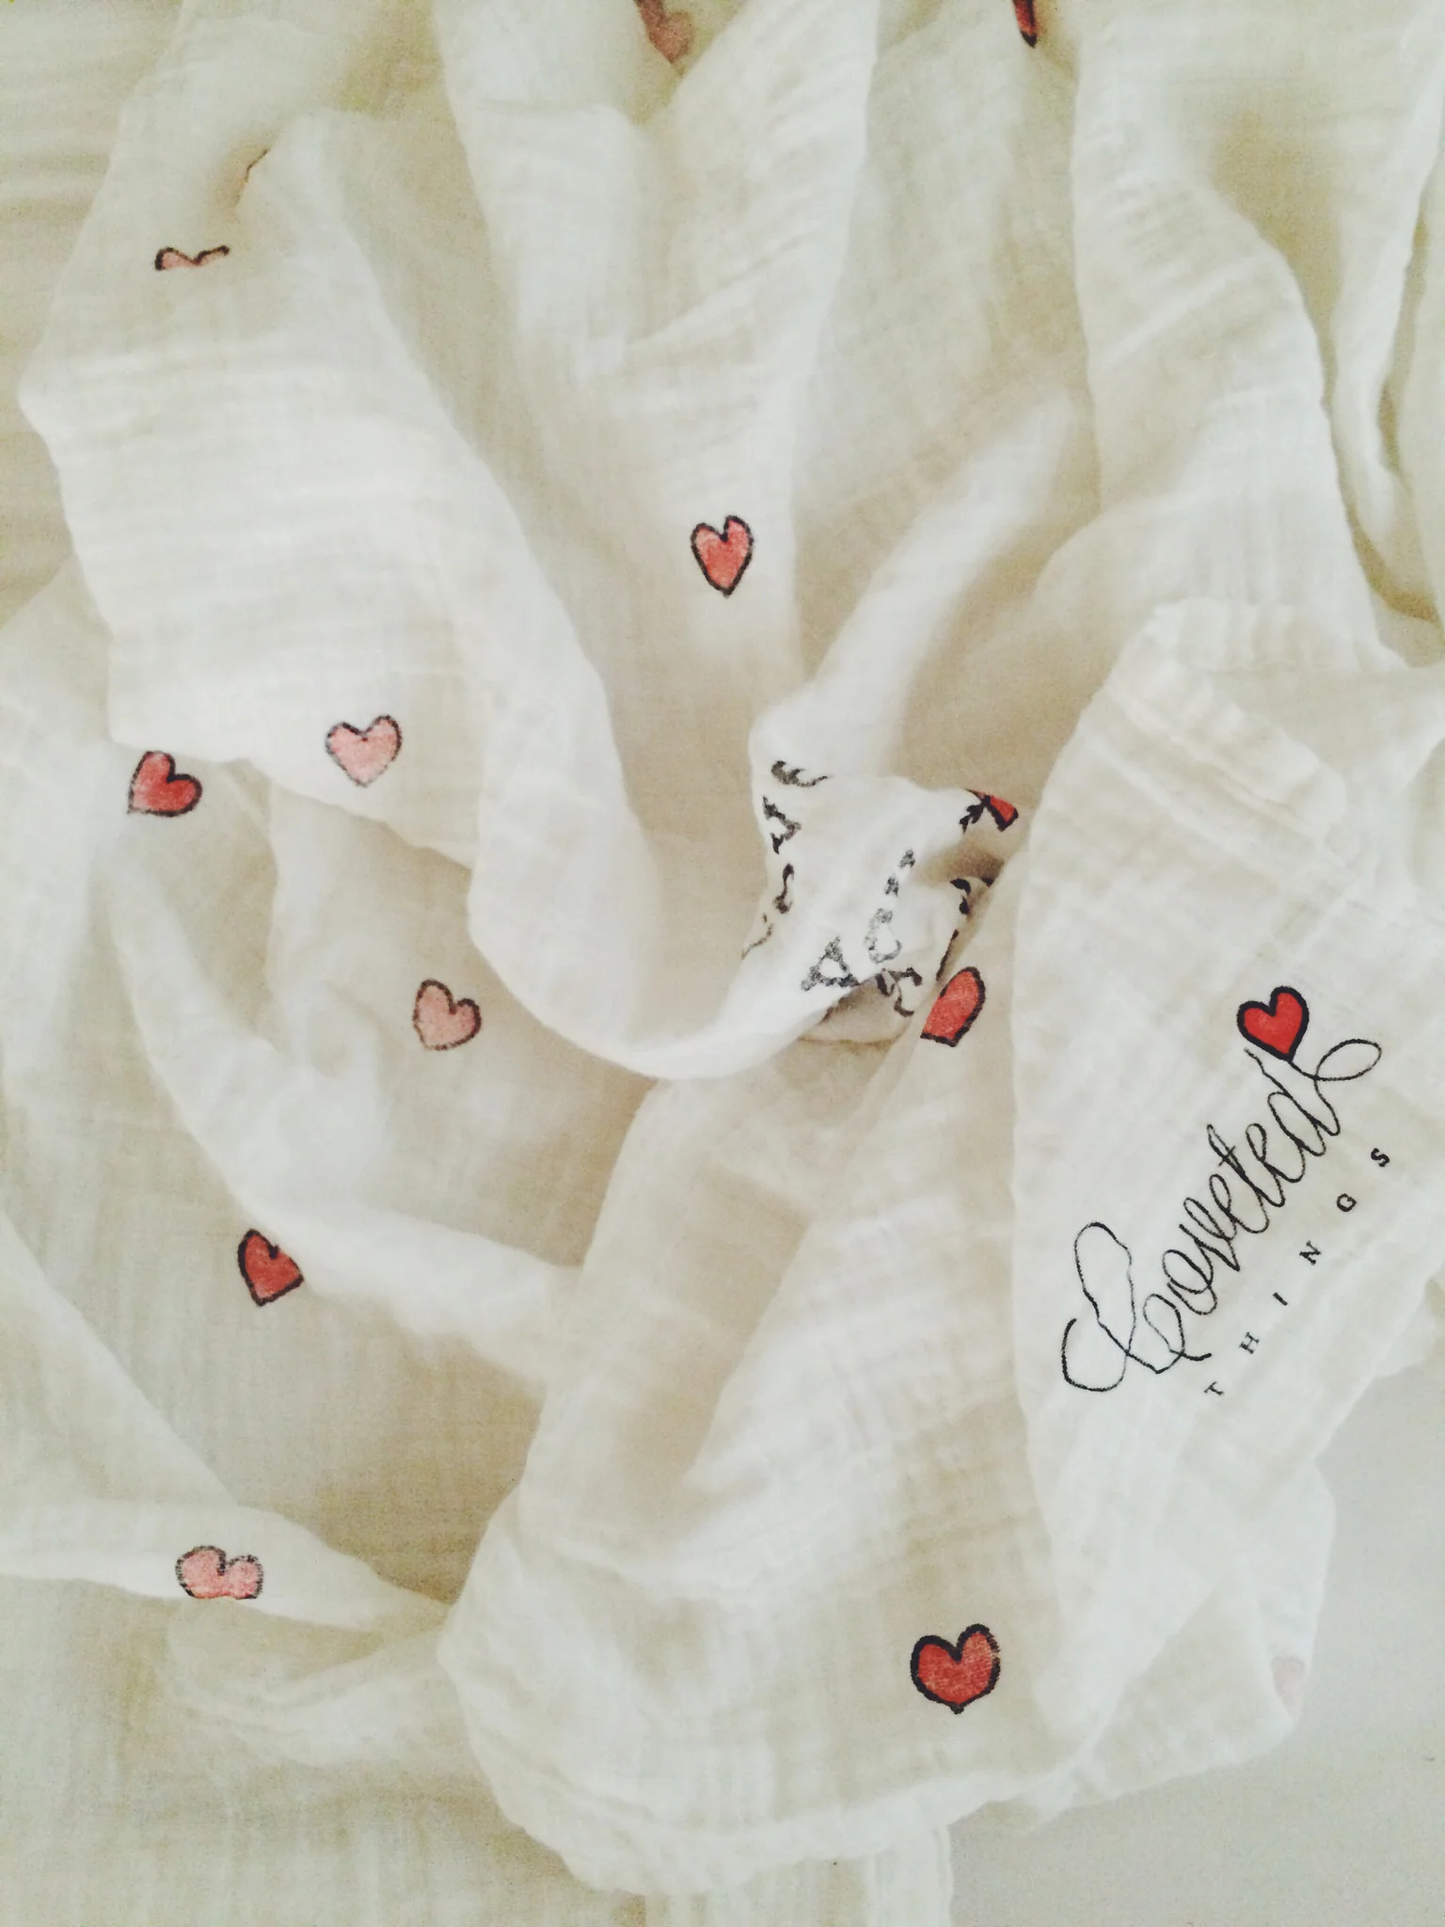 Love You Forever and Ever Organic Swaddle Blanket